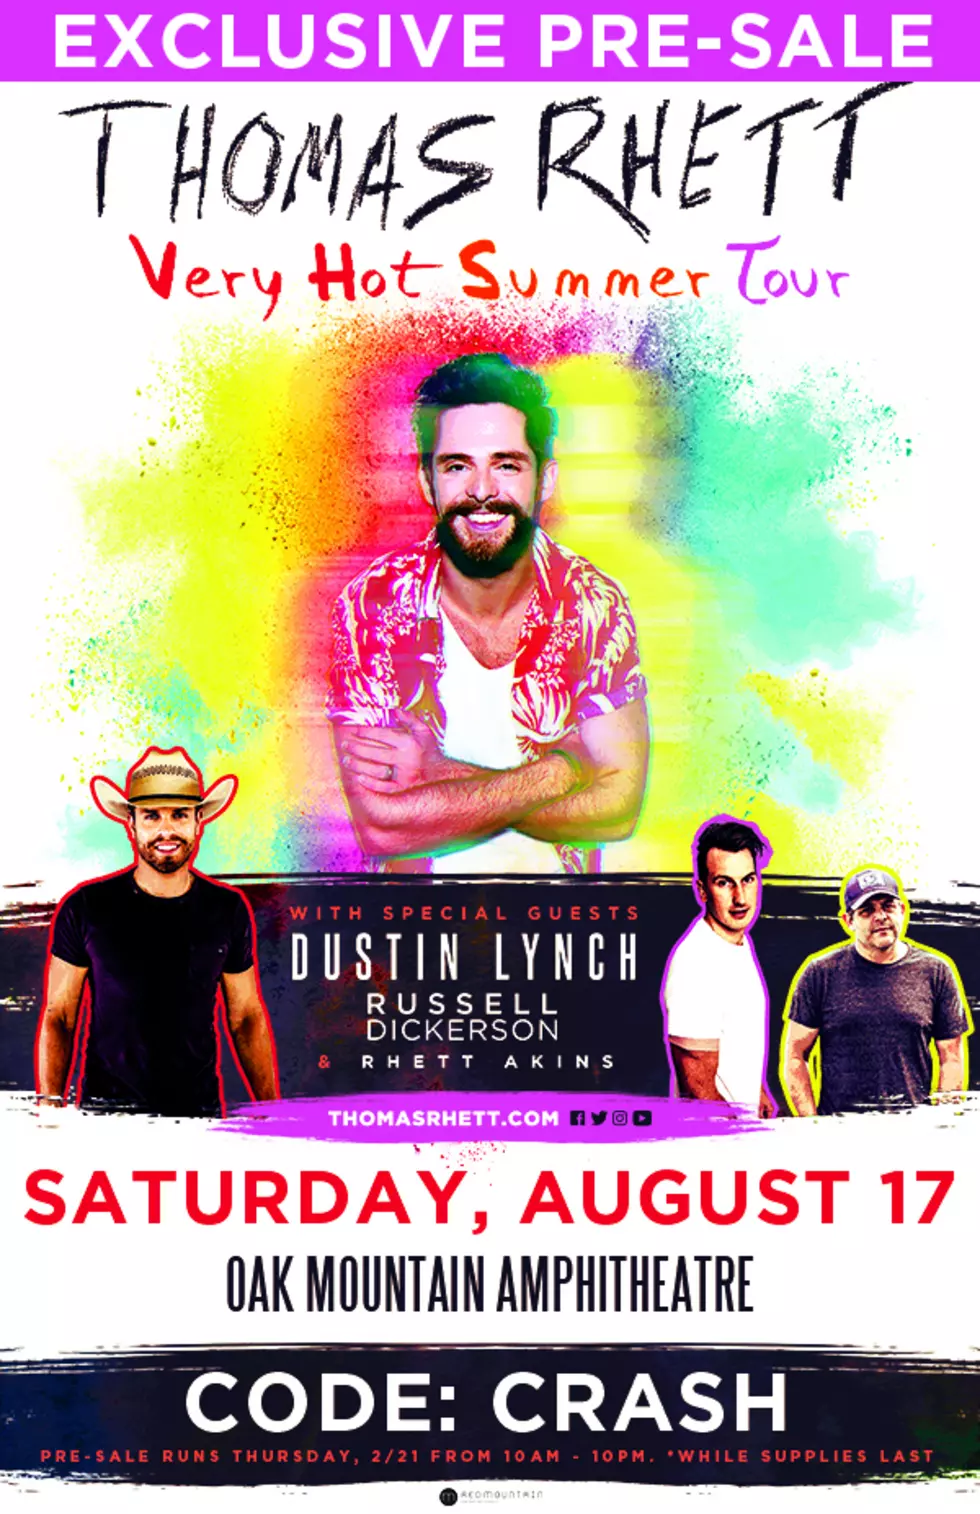 Get EXCLUSIVE pre-sale tickets to see Thomas Rhett at the Oak Mountain Amphitheater